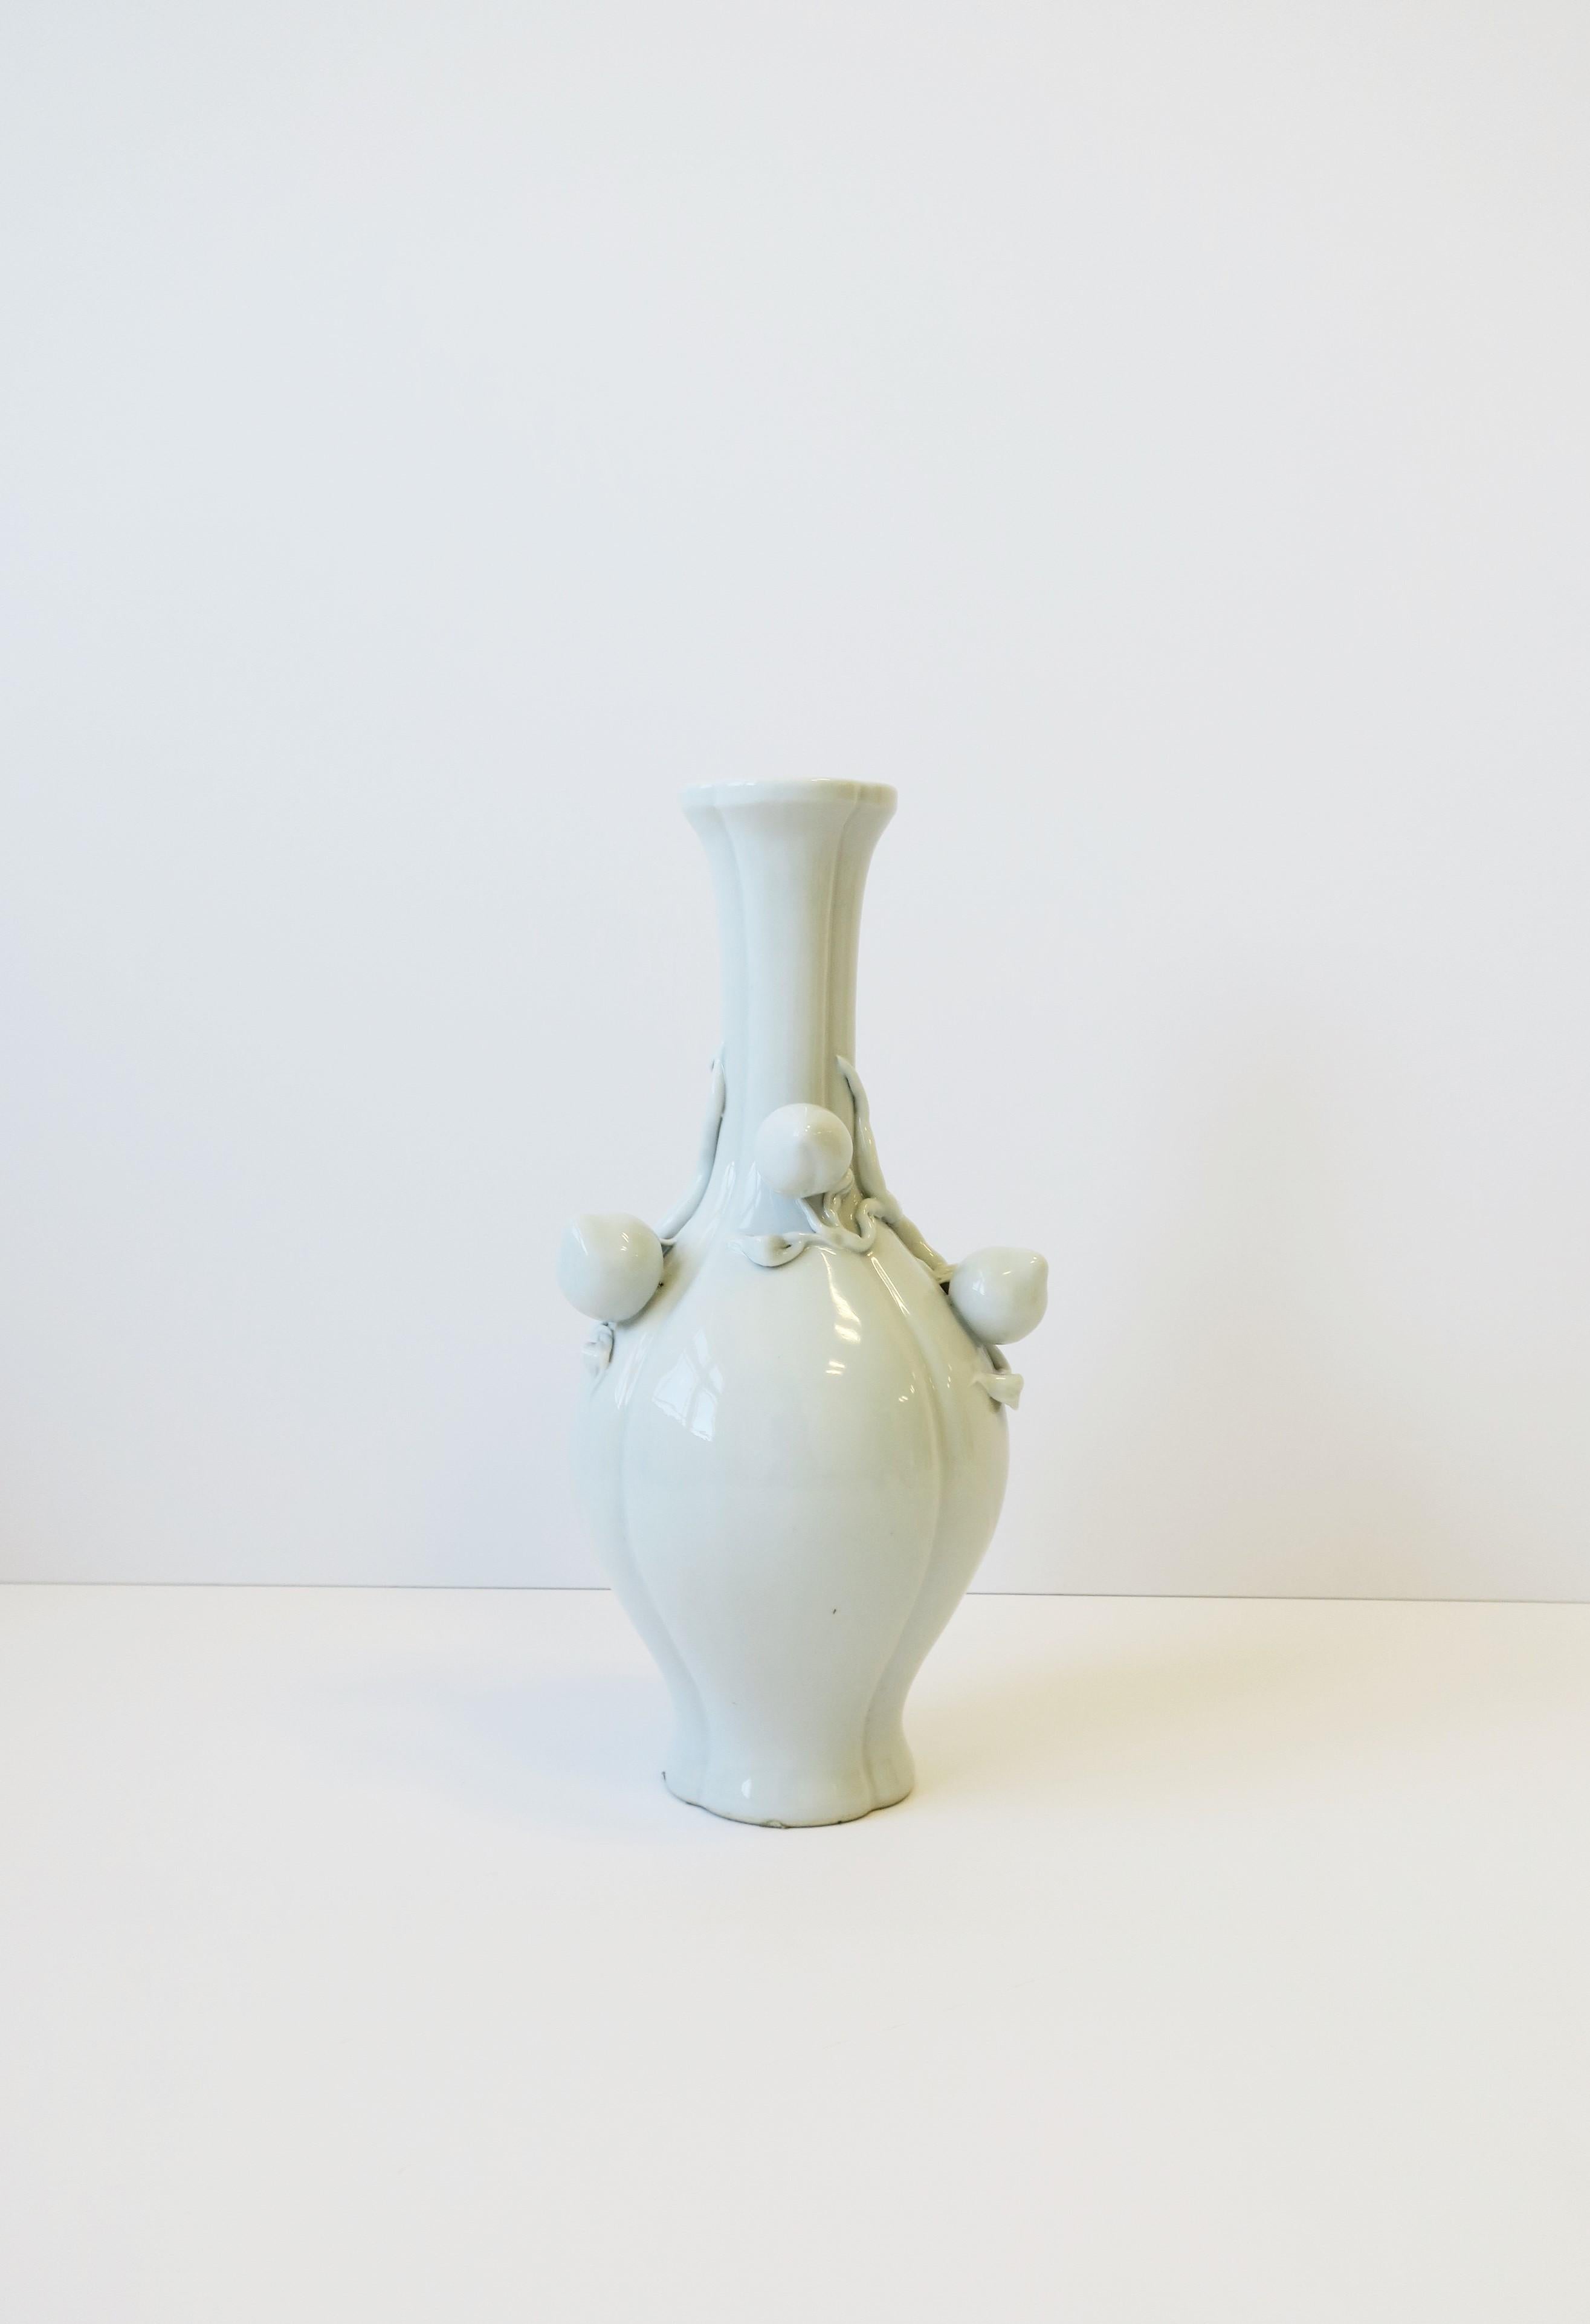 White Blanc de Chine Porcelain Vase with Fruit, Leaves and Vines In Good Condition For Sale In New York, NY